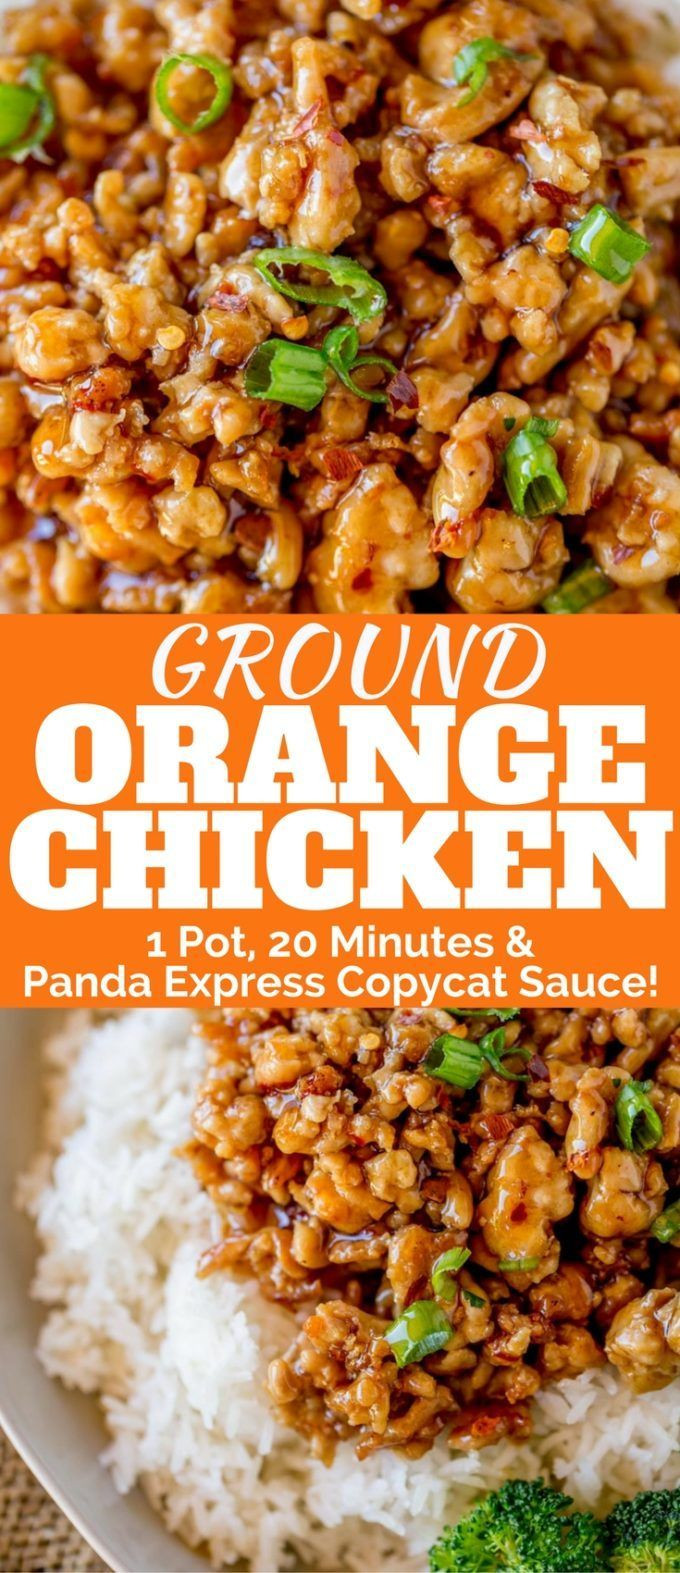 Recipes Using Ground Chicken
 25 best ideas about e and only on Pinterest